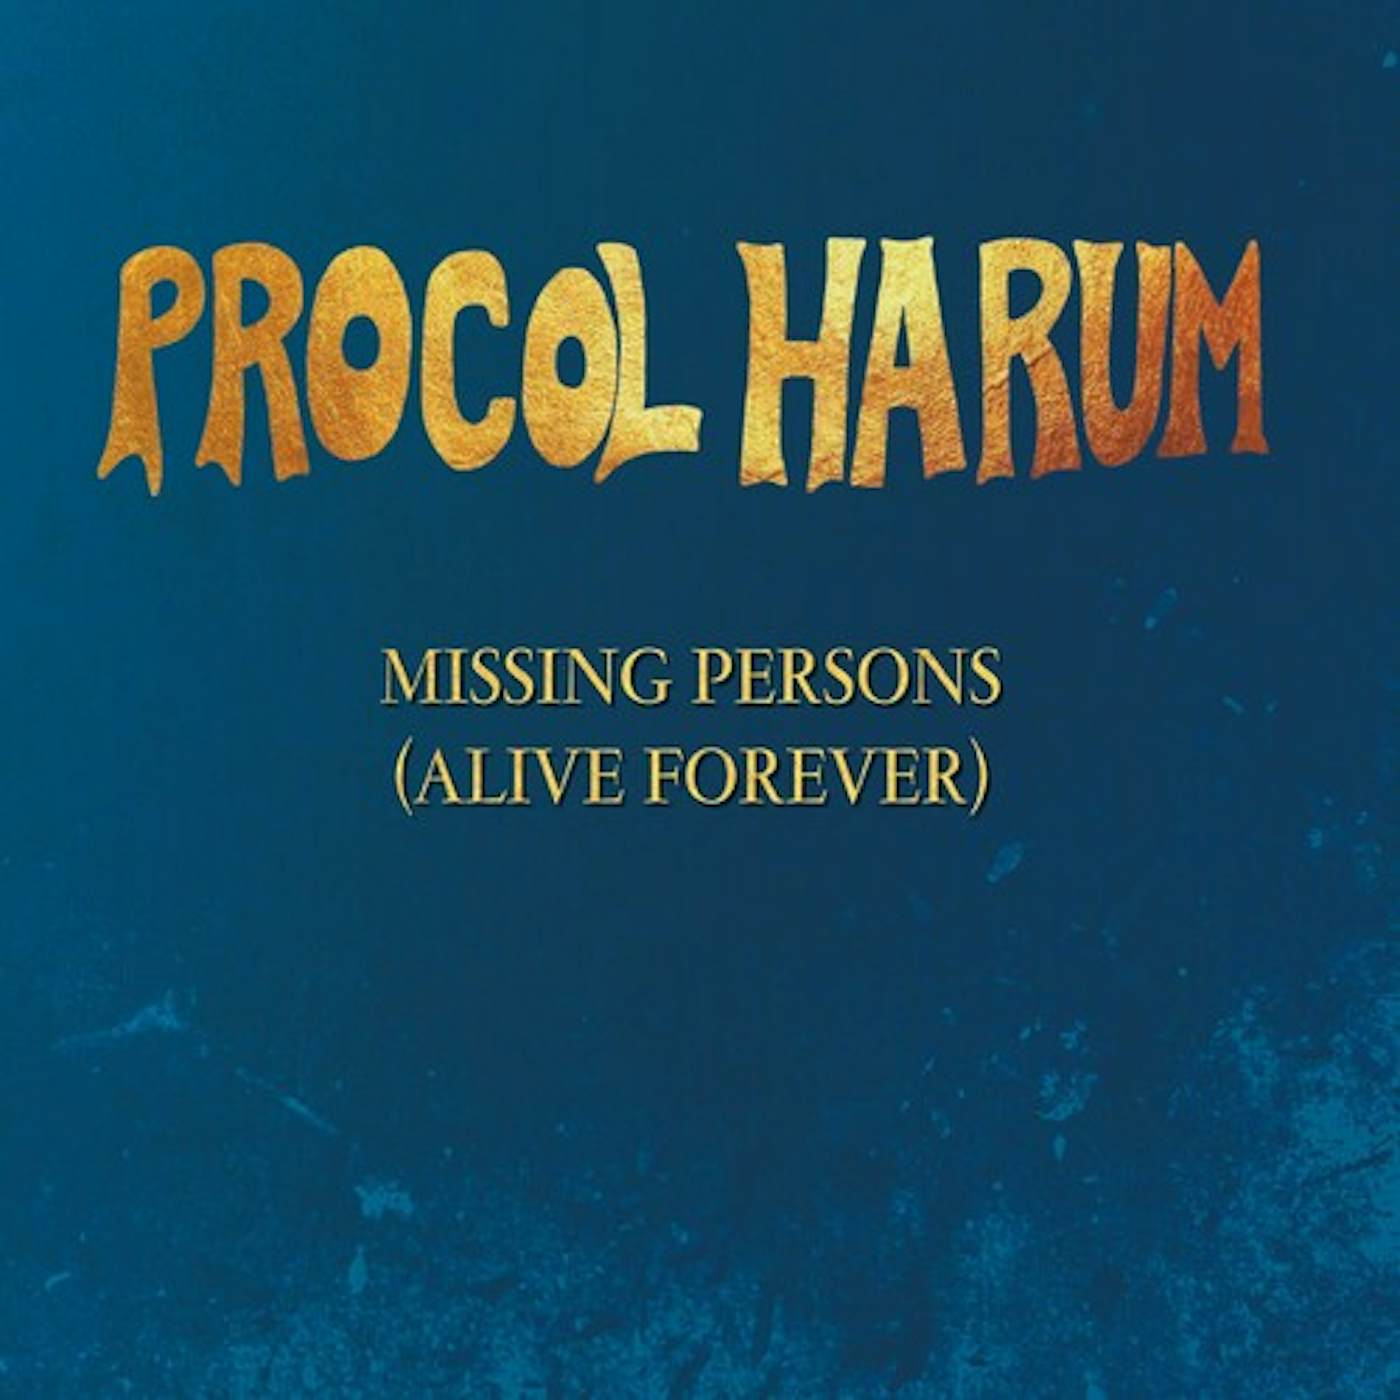 Procol Harum MISSING PERSONS (ALIVE FOREVER) CD